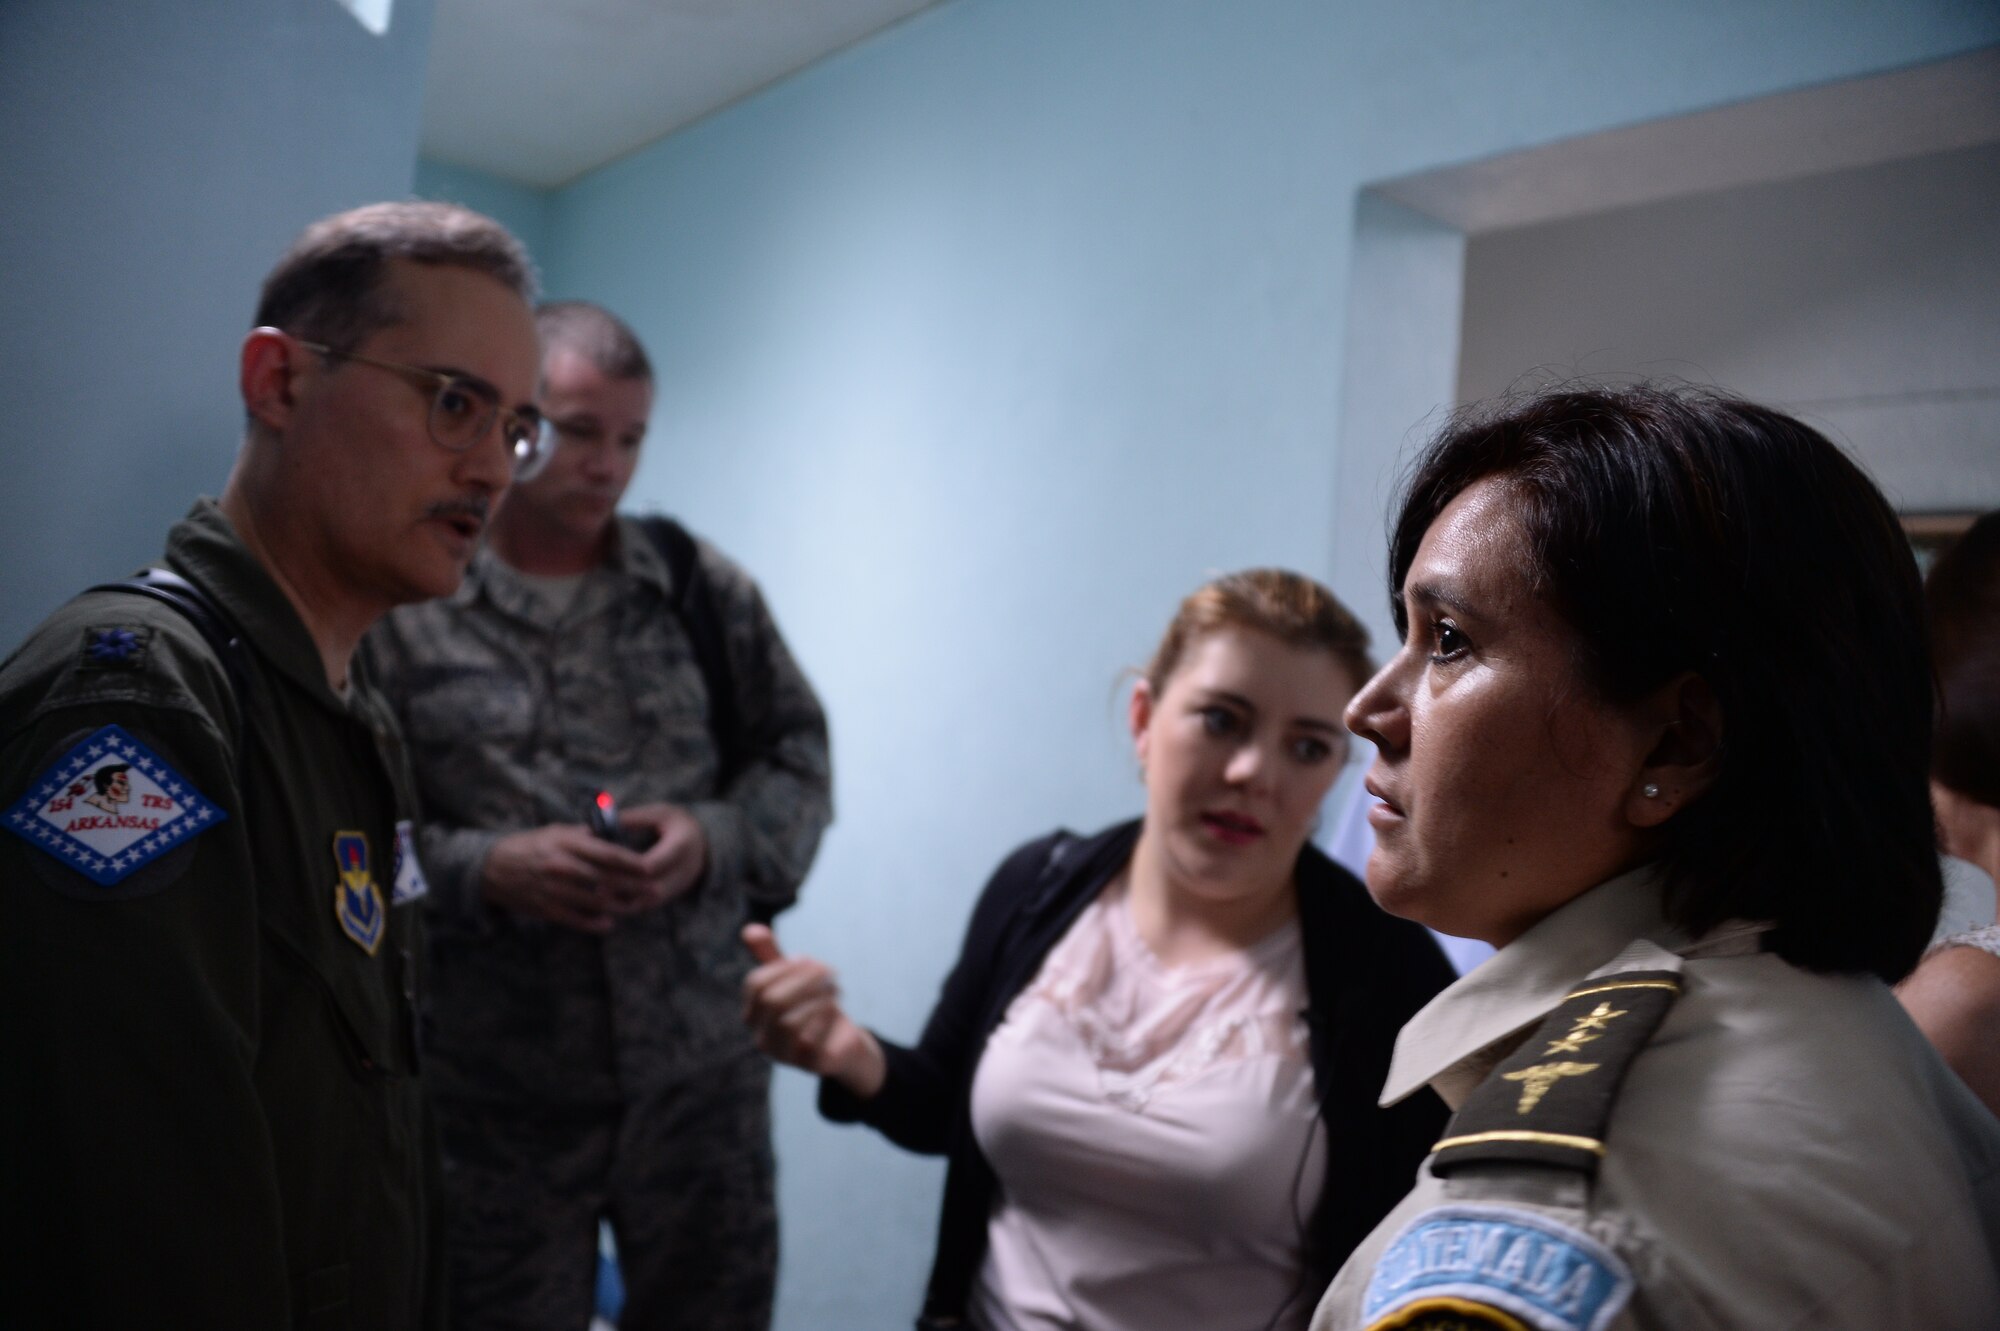 Col. Veronica Dono, nurse with the Guatemalan air force gives a tour of the hospital to members of Arkansas Air National Guard, and 12th Air Force (Air Forces Southern) during a subject matter expert exchange in Guatemala City, Guatemala, Aug. 4, 2014.  The visiting members wanted to look at the facilities to better understand the needs of the Guatemalan air force.  (U.S. Air Force photo by Tech. Sgt. Heather R. Redman/Released) 